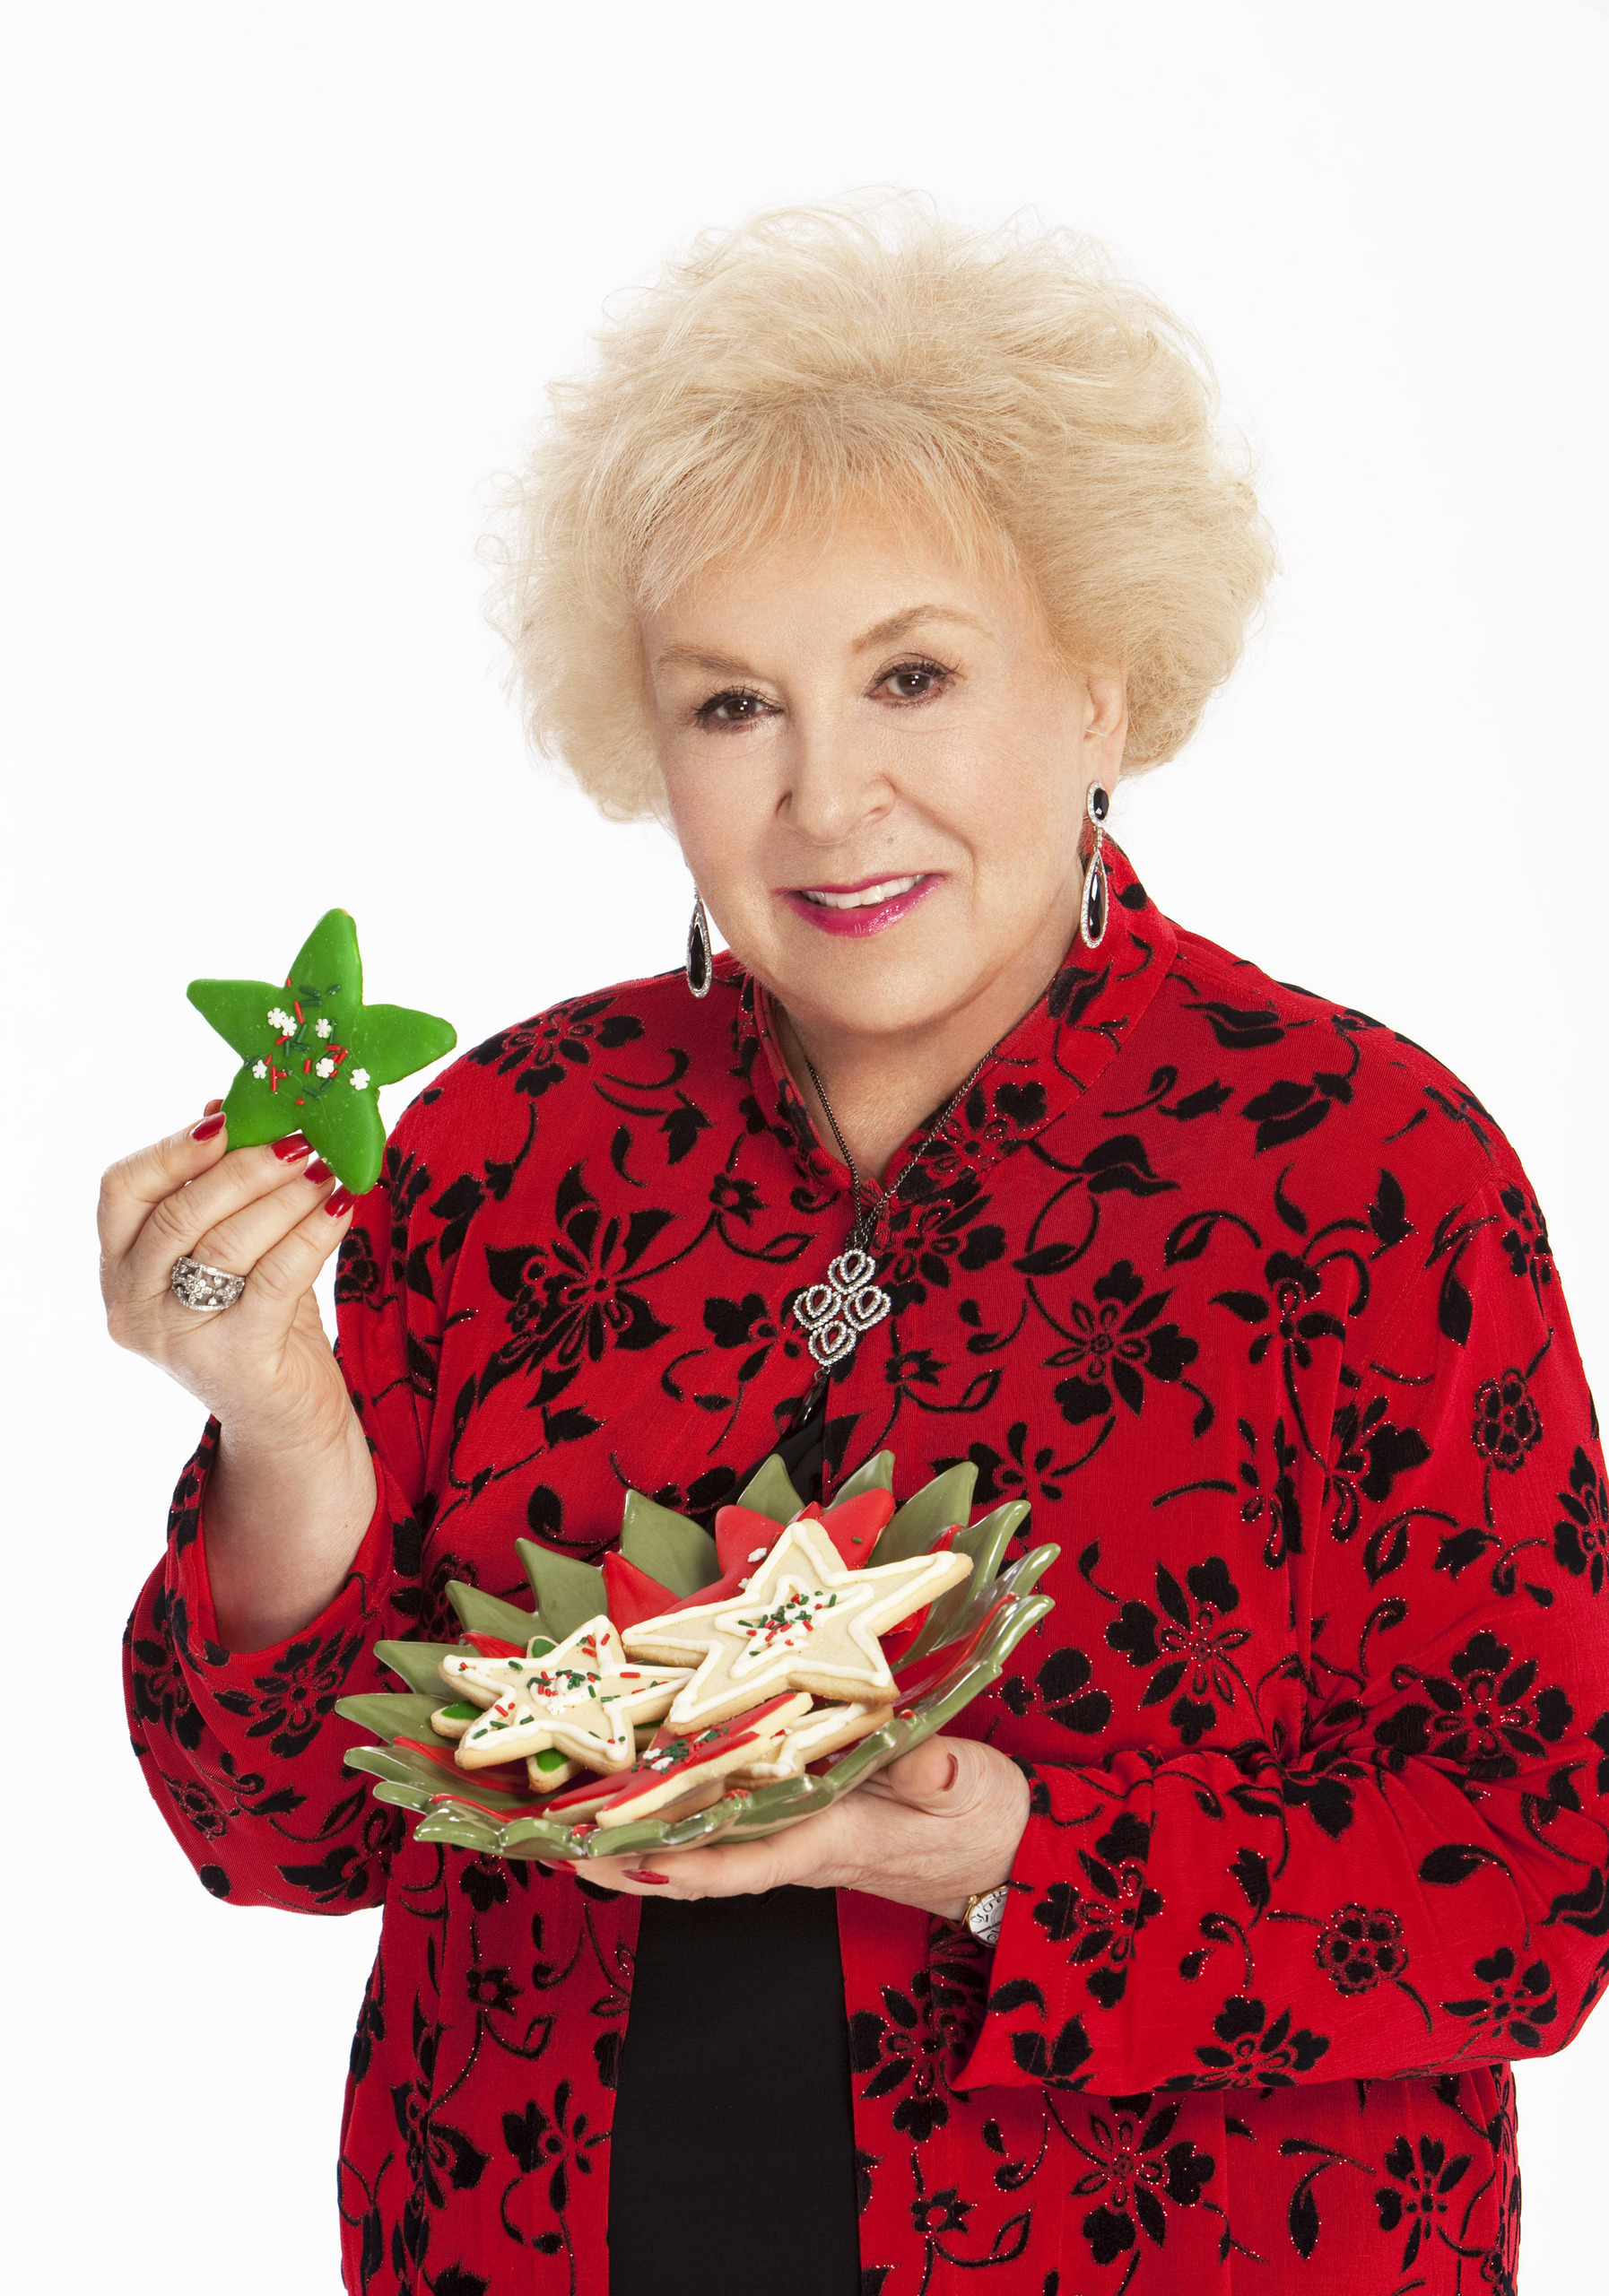 Doris Roberts reprises her role as the loveable Mrs. Emily Merkle, whose magical spirit brings nothing short of miracles to new friends who are struggling during the holiday season. Photo:   Copyright 2010 Crown Media Holdings, Inc./Photographer Eike Schroter